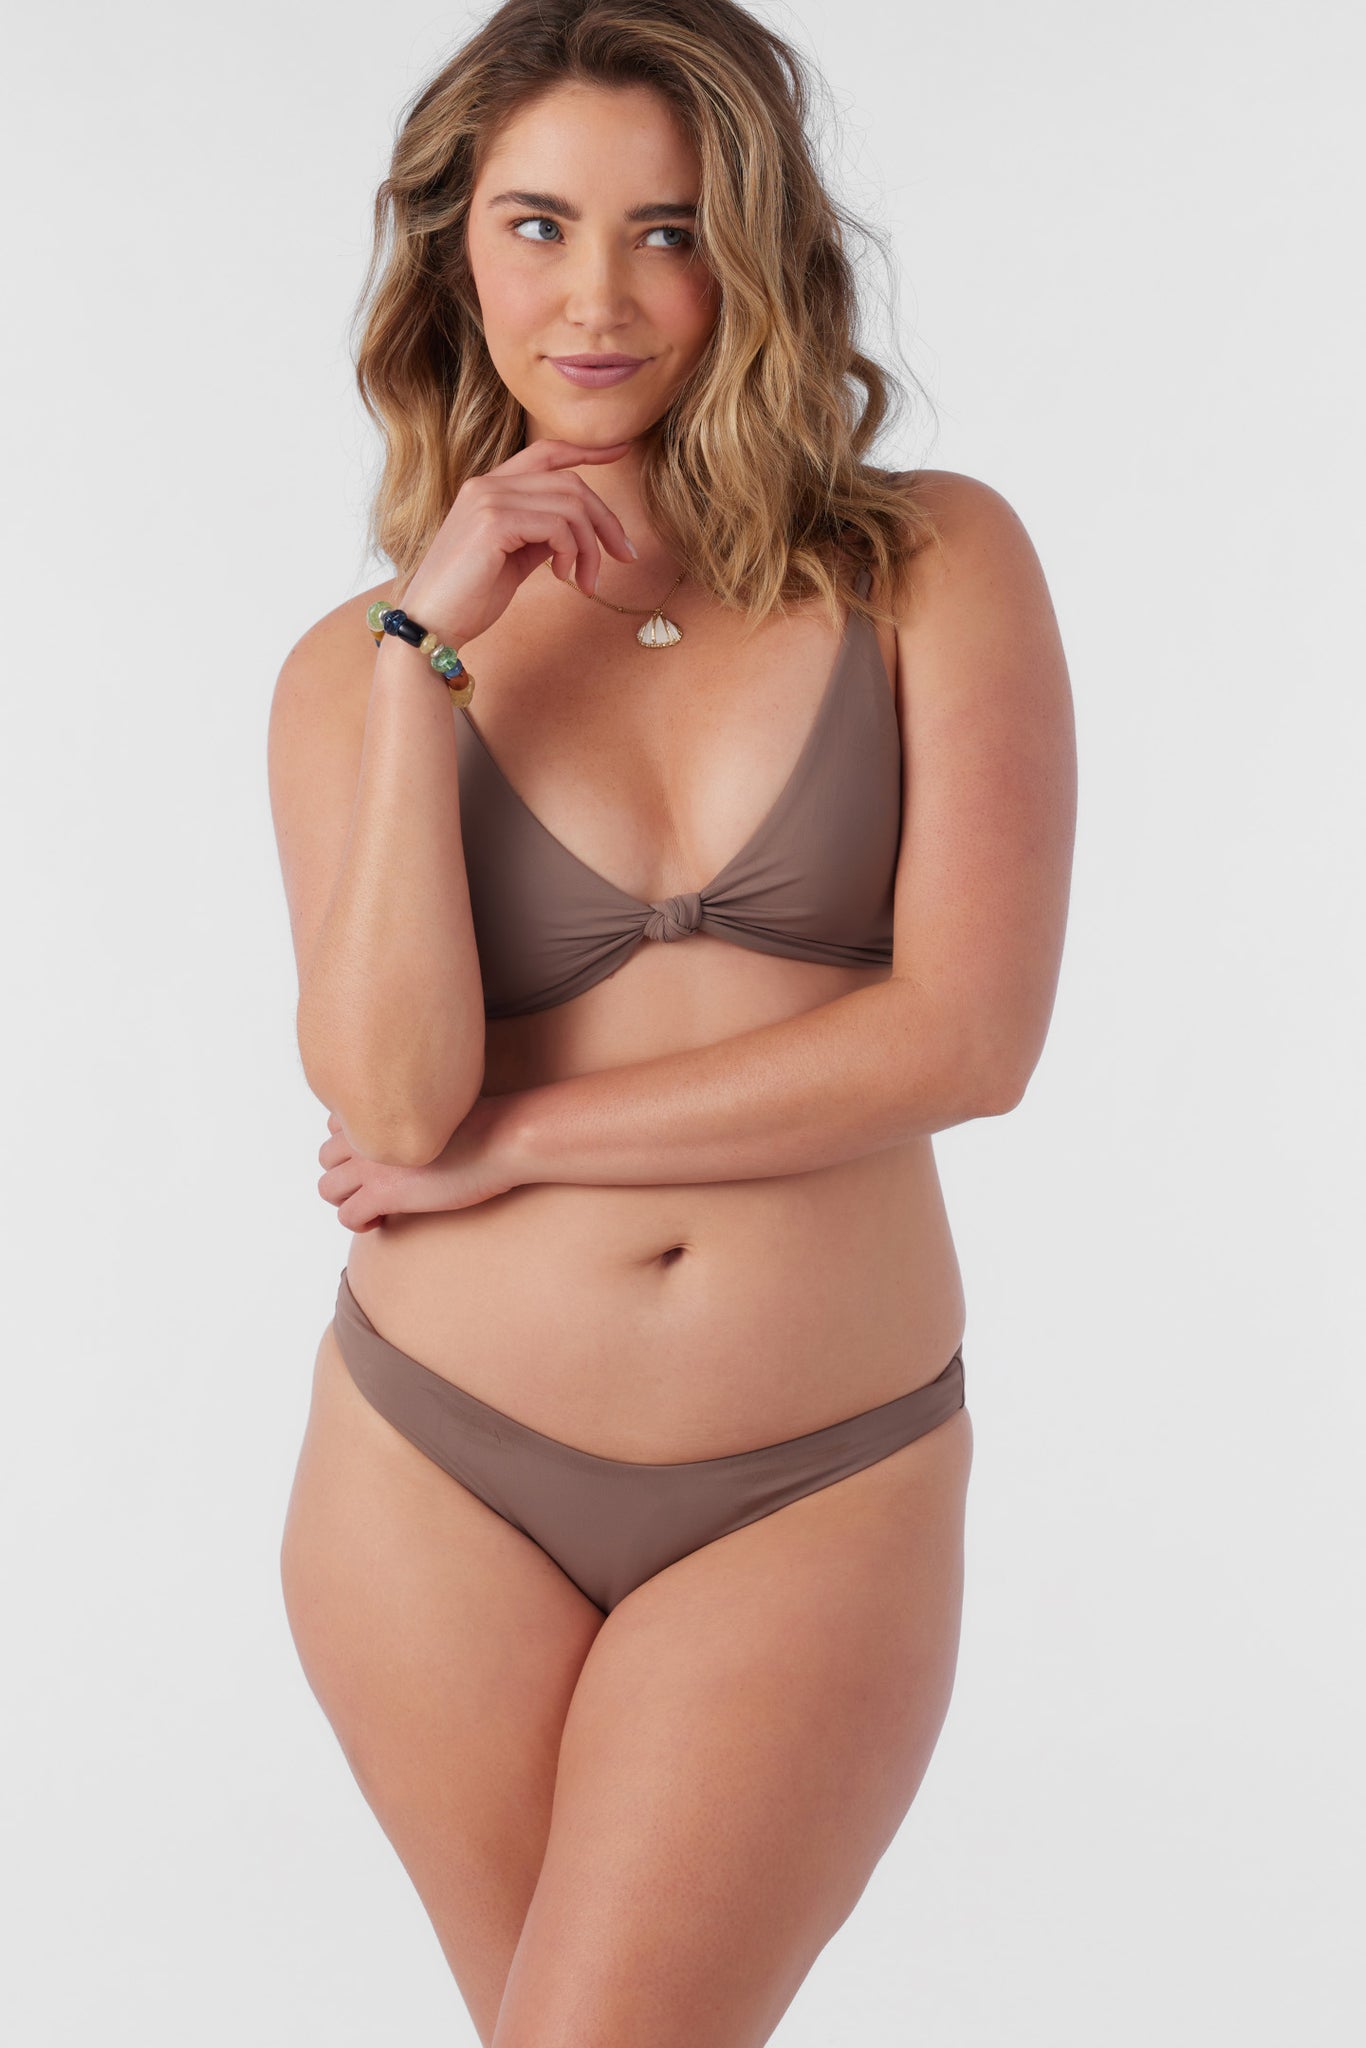 SALTWATER SOLIDS PISMO TALL TRI BRALETTE TOP